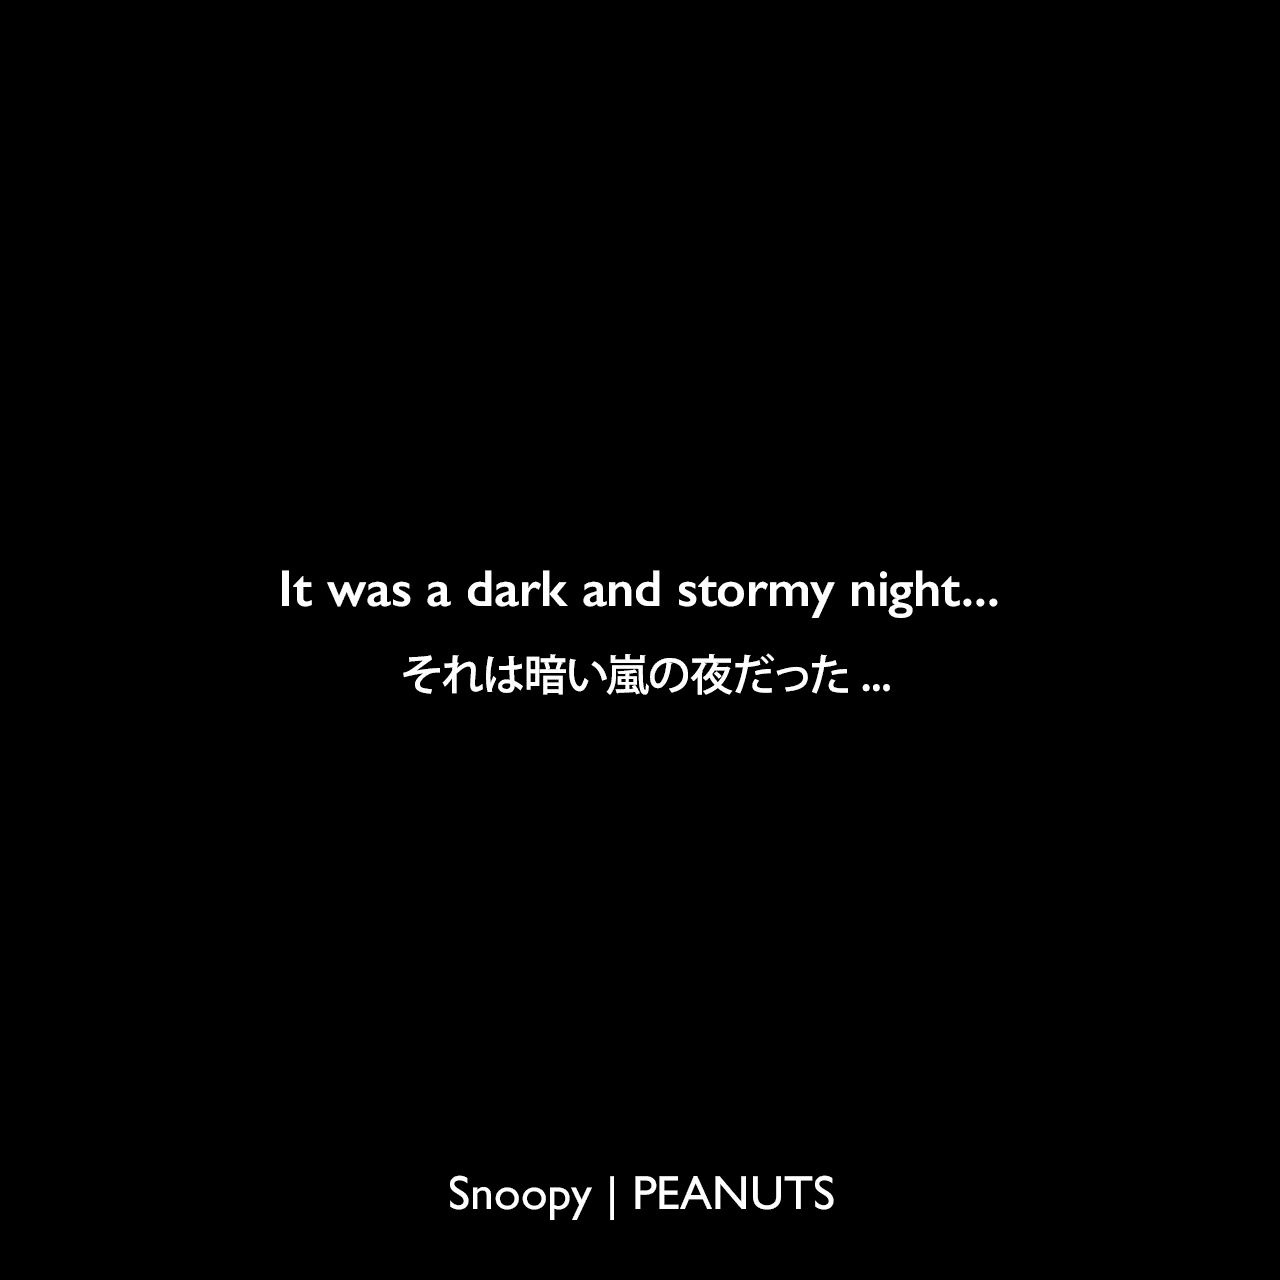 It was a dark and stormy night... (appeared for the first time on 12 Jul 65)それは暗い嵐の夜だった...（スヌーピーの小説の冒頭文）Charles Monroe Schulz